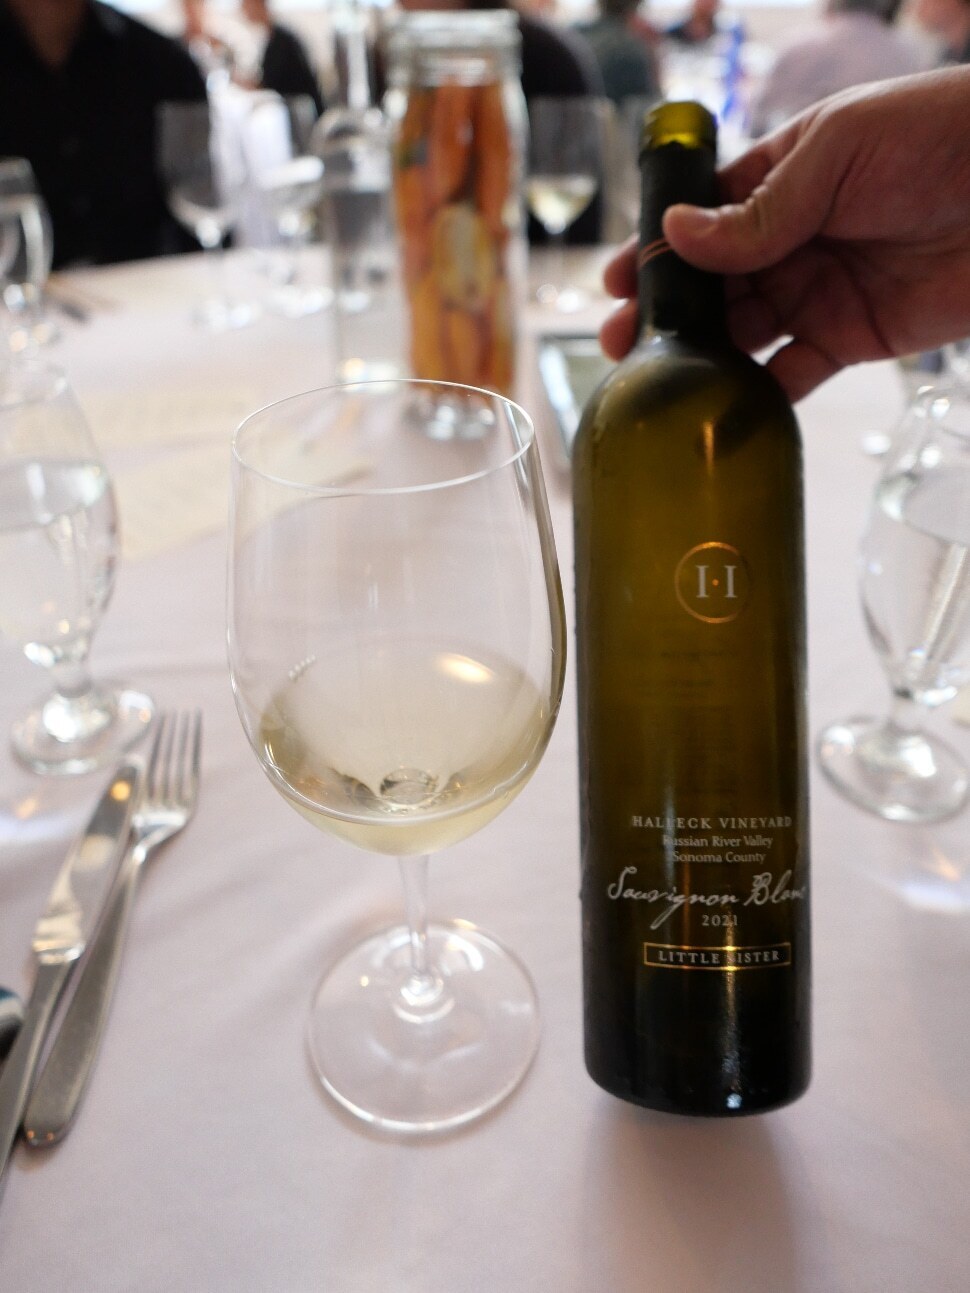 2021 Little Sister California Sauvignon Blanc paired expressively with Los tres Socios dish.